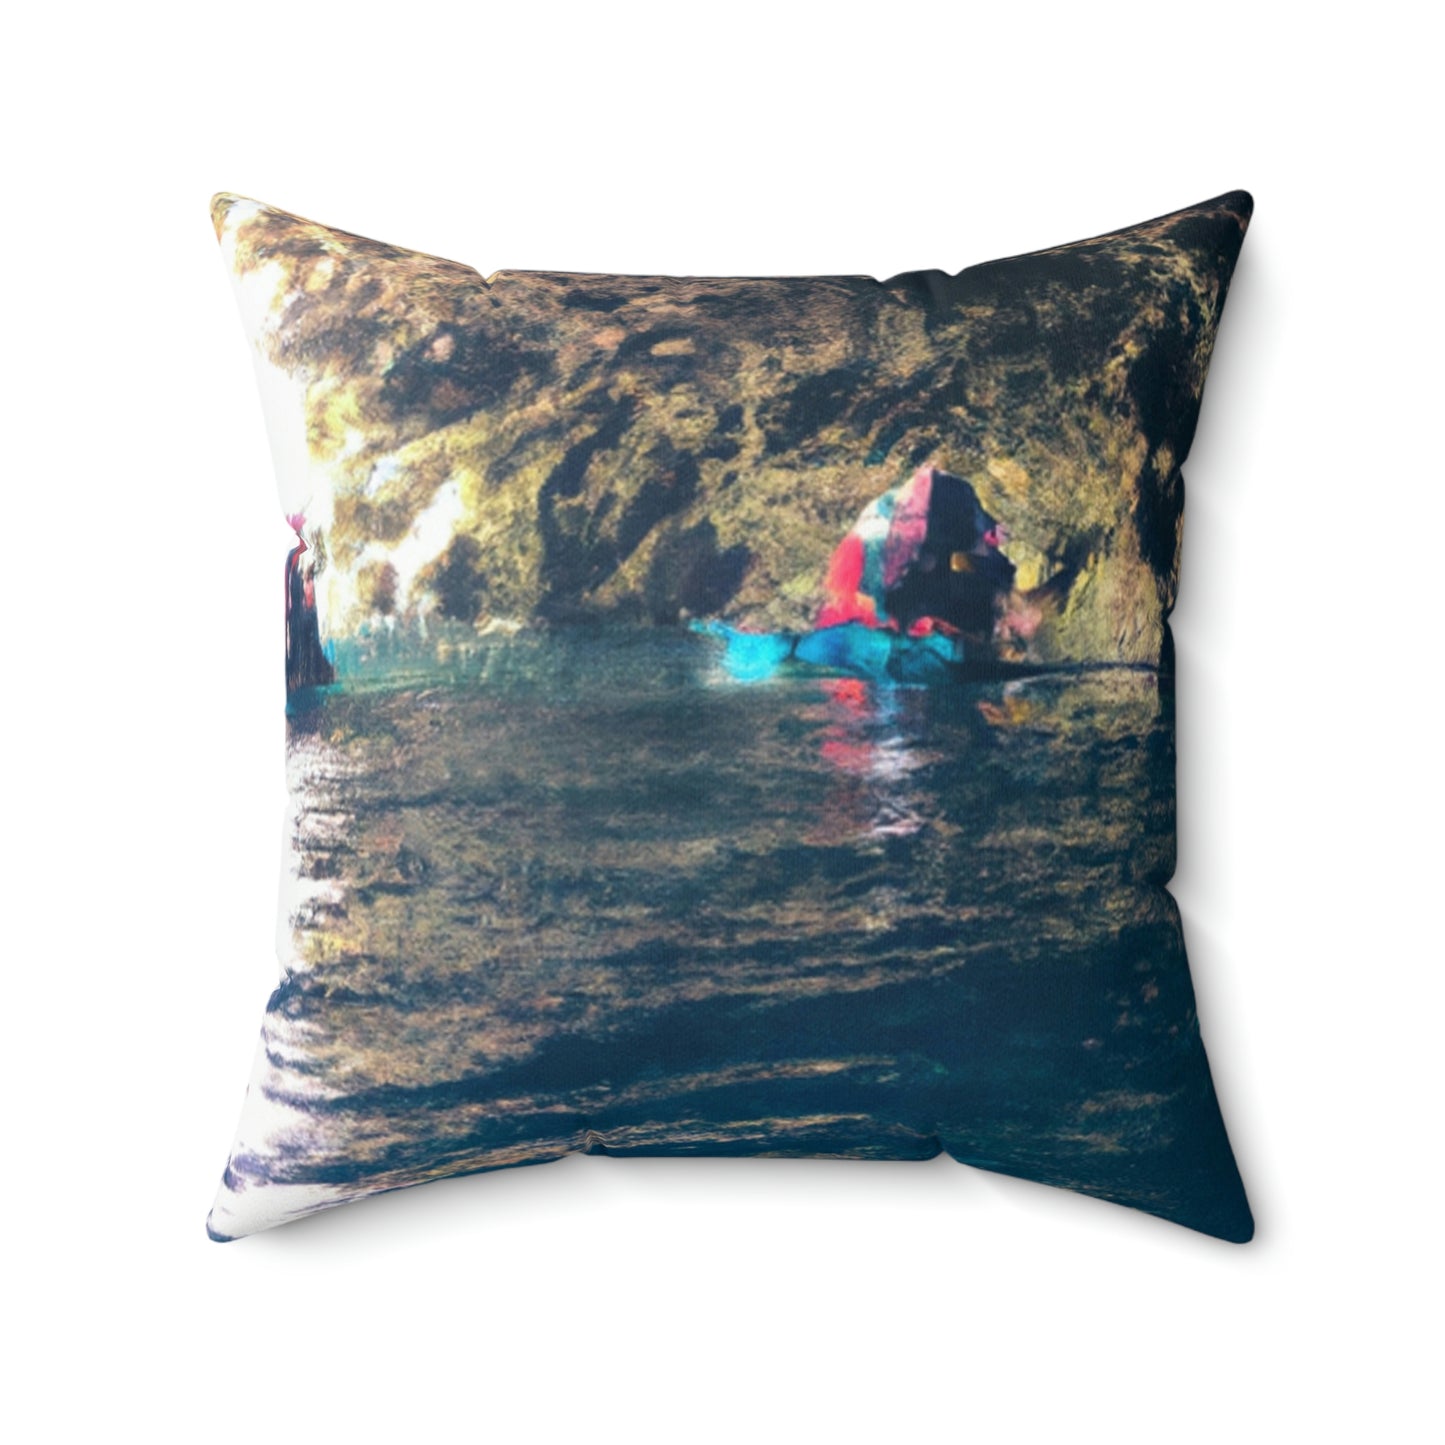 The Diving Depths of the Oceanic Cave - The Alien Square Pillow